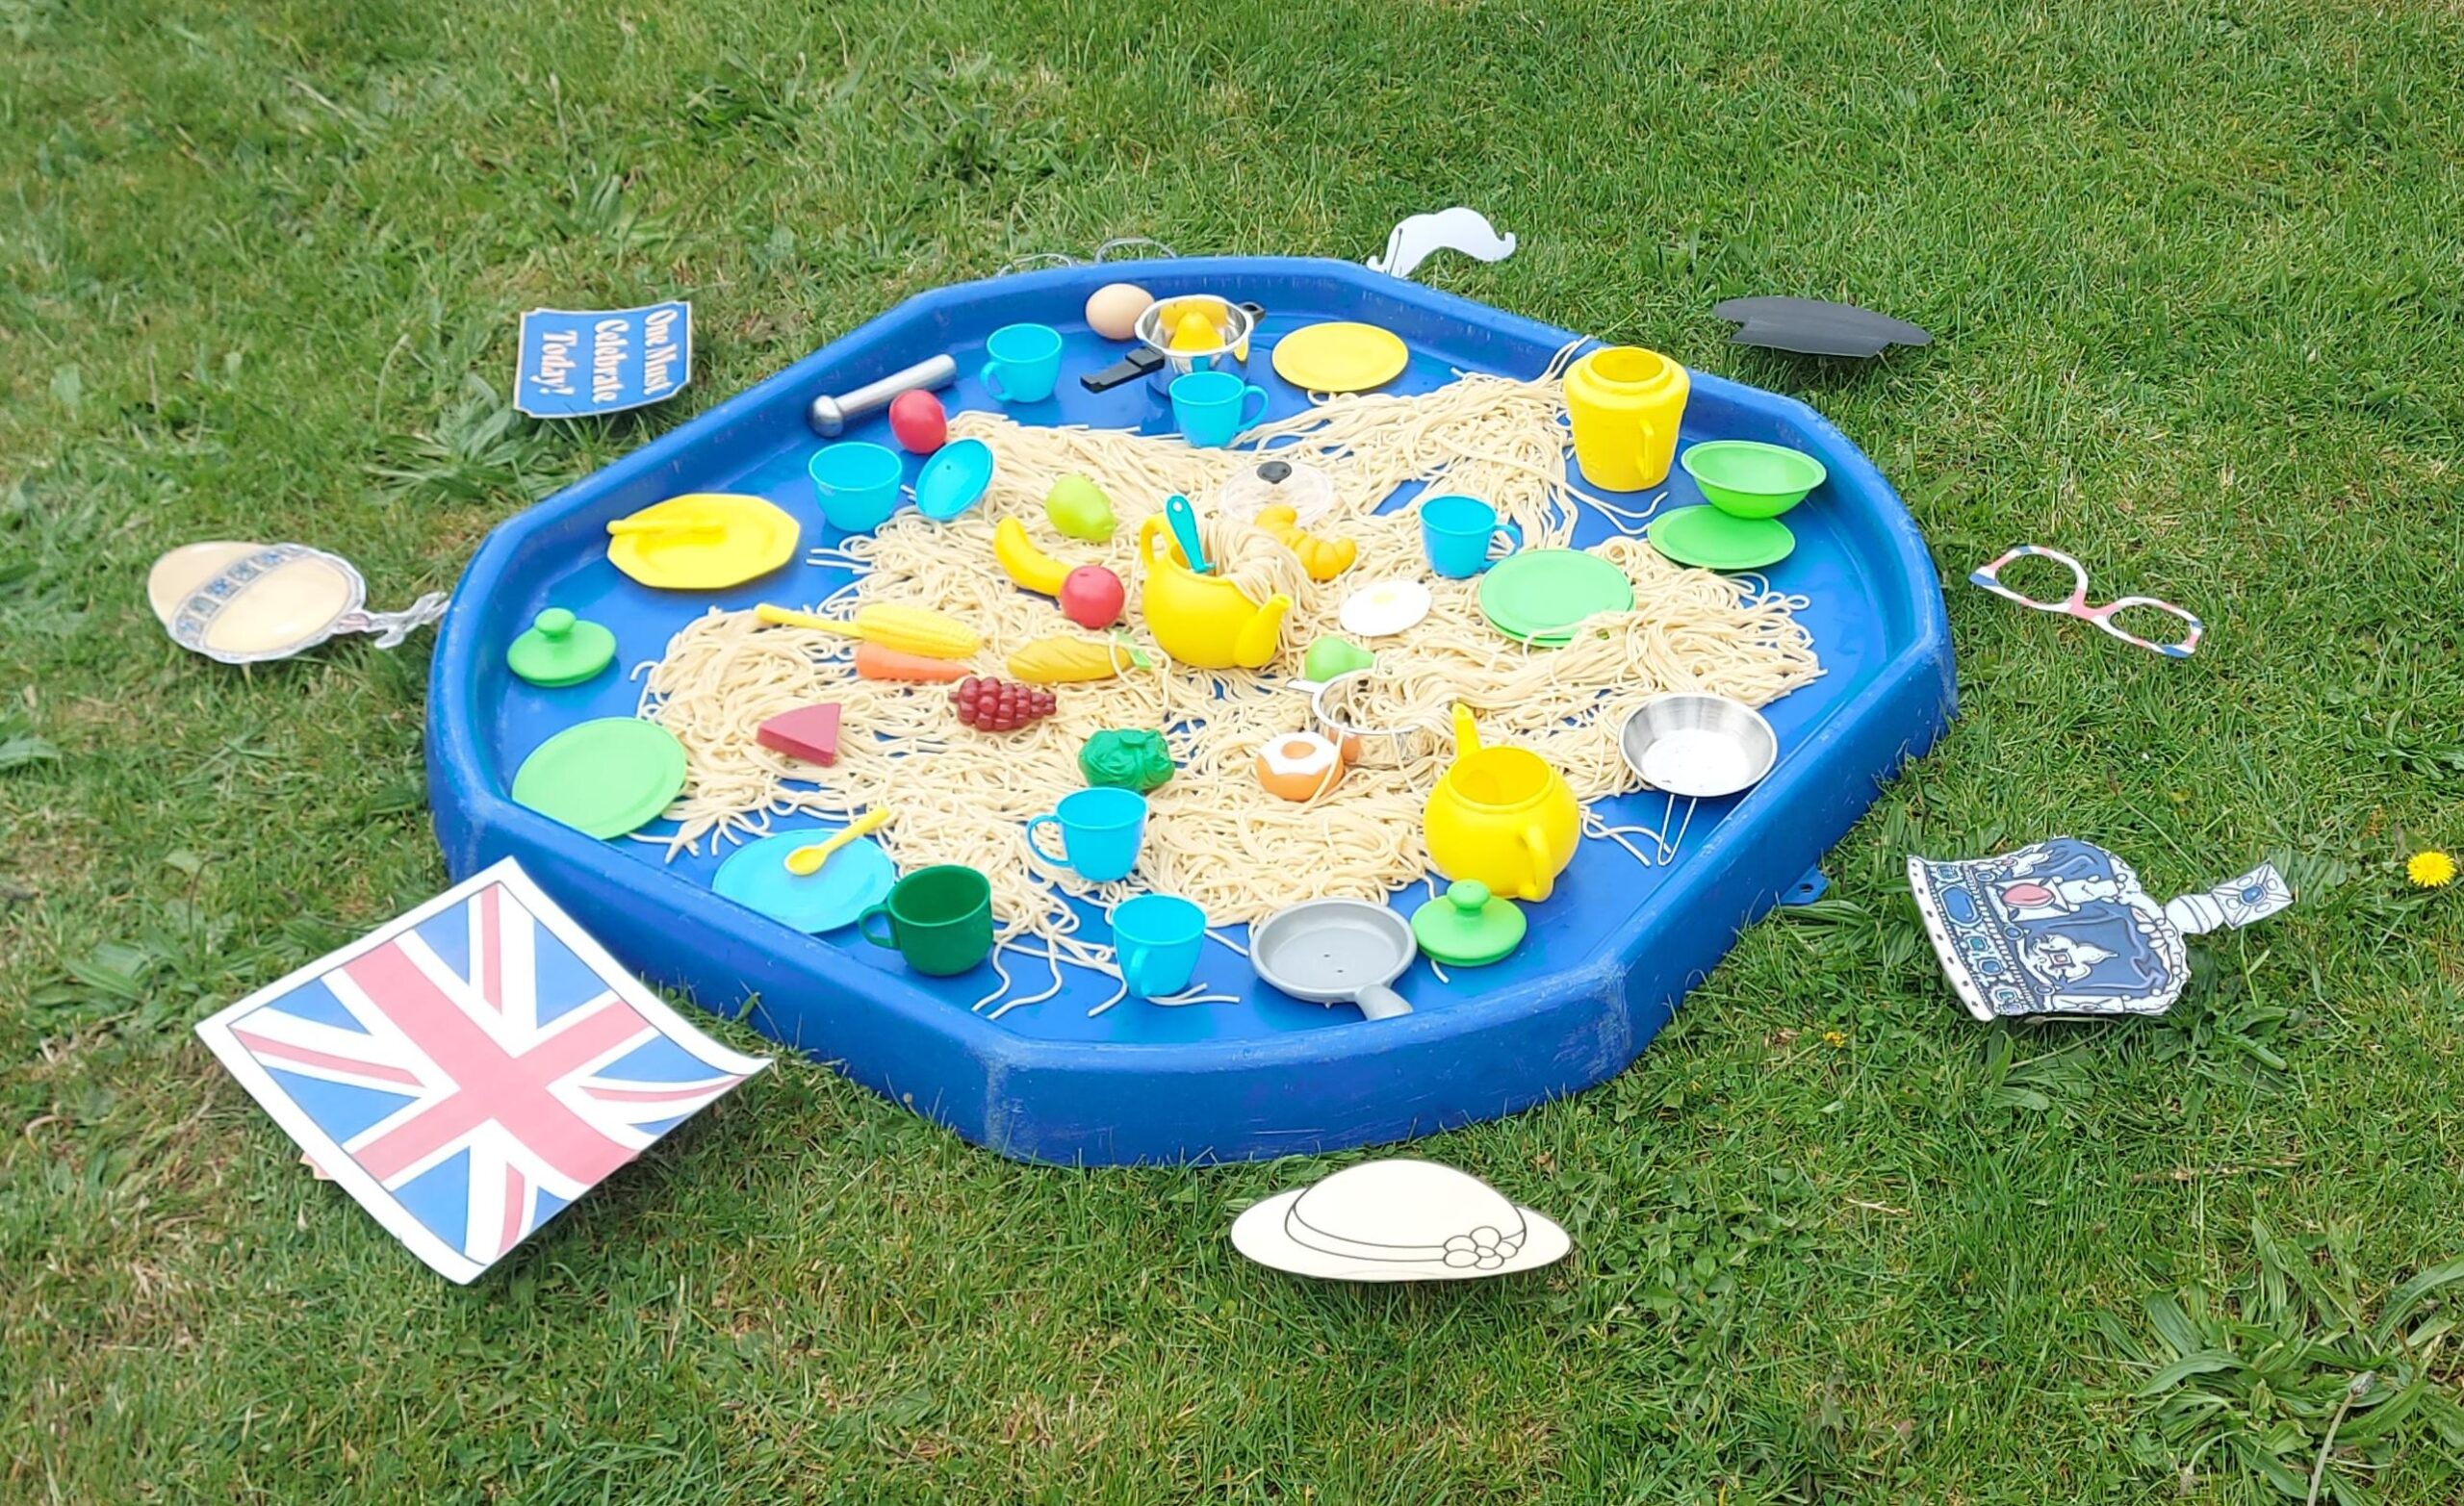 Tough tray set up with children's activities